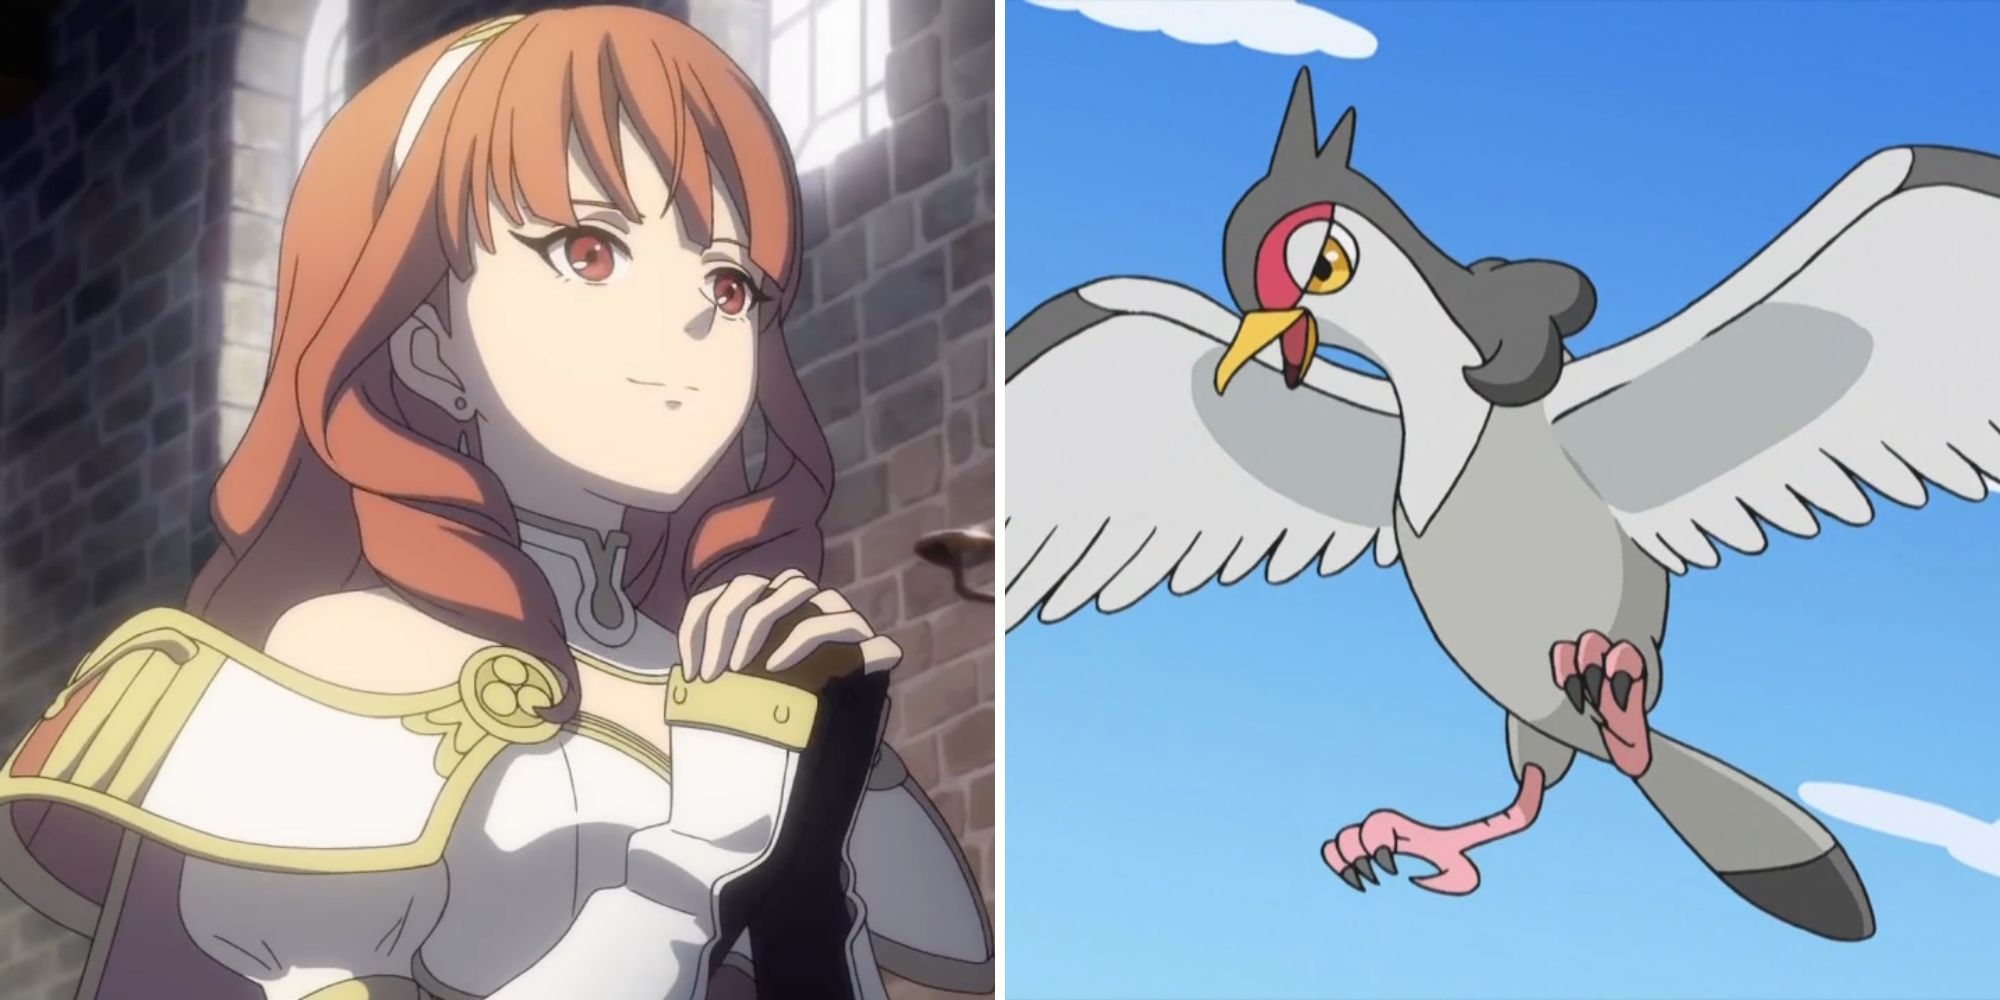 Celica prays in a church and Tranquill soars through the sky